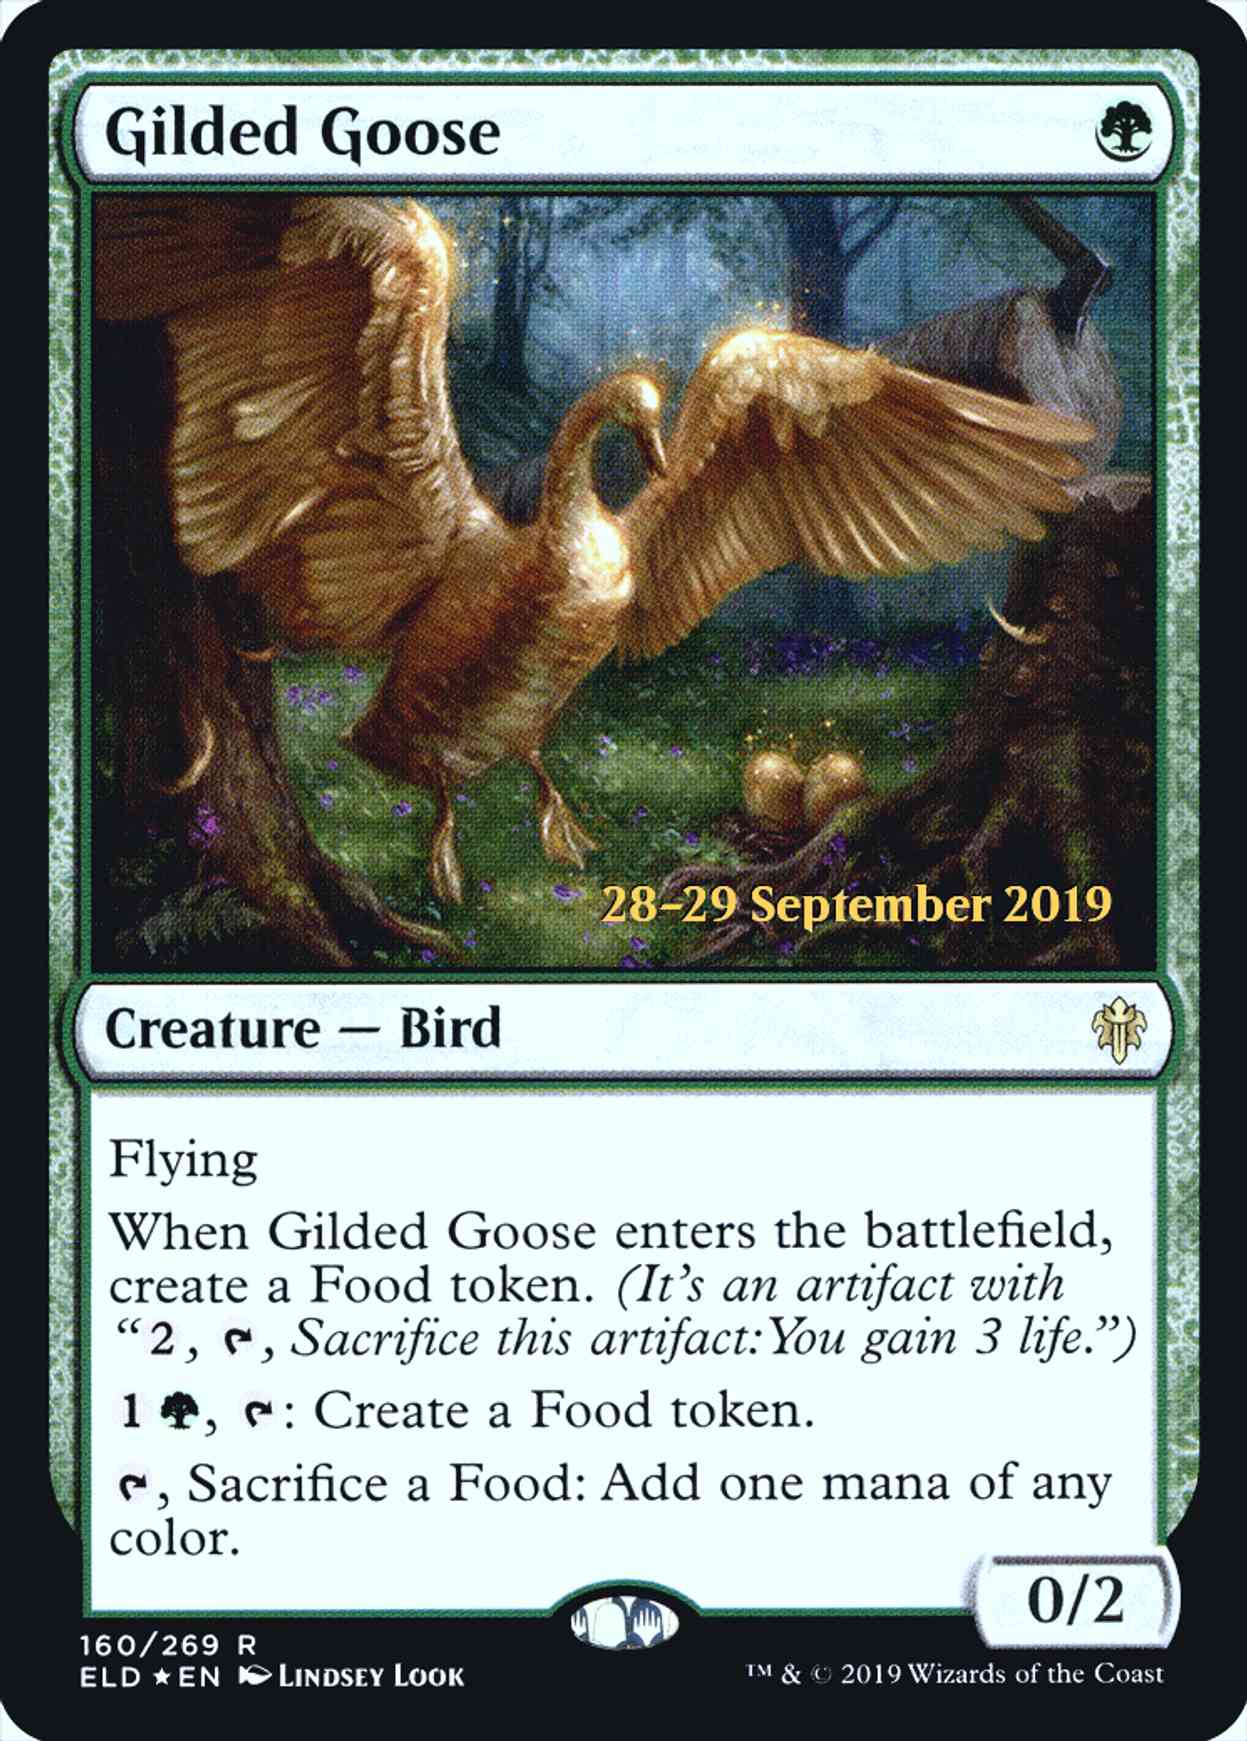 Gilded Goose magic card front